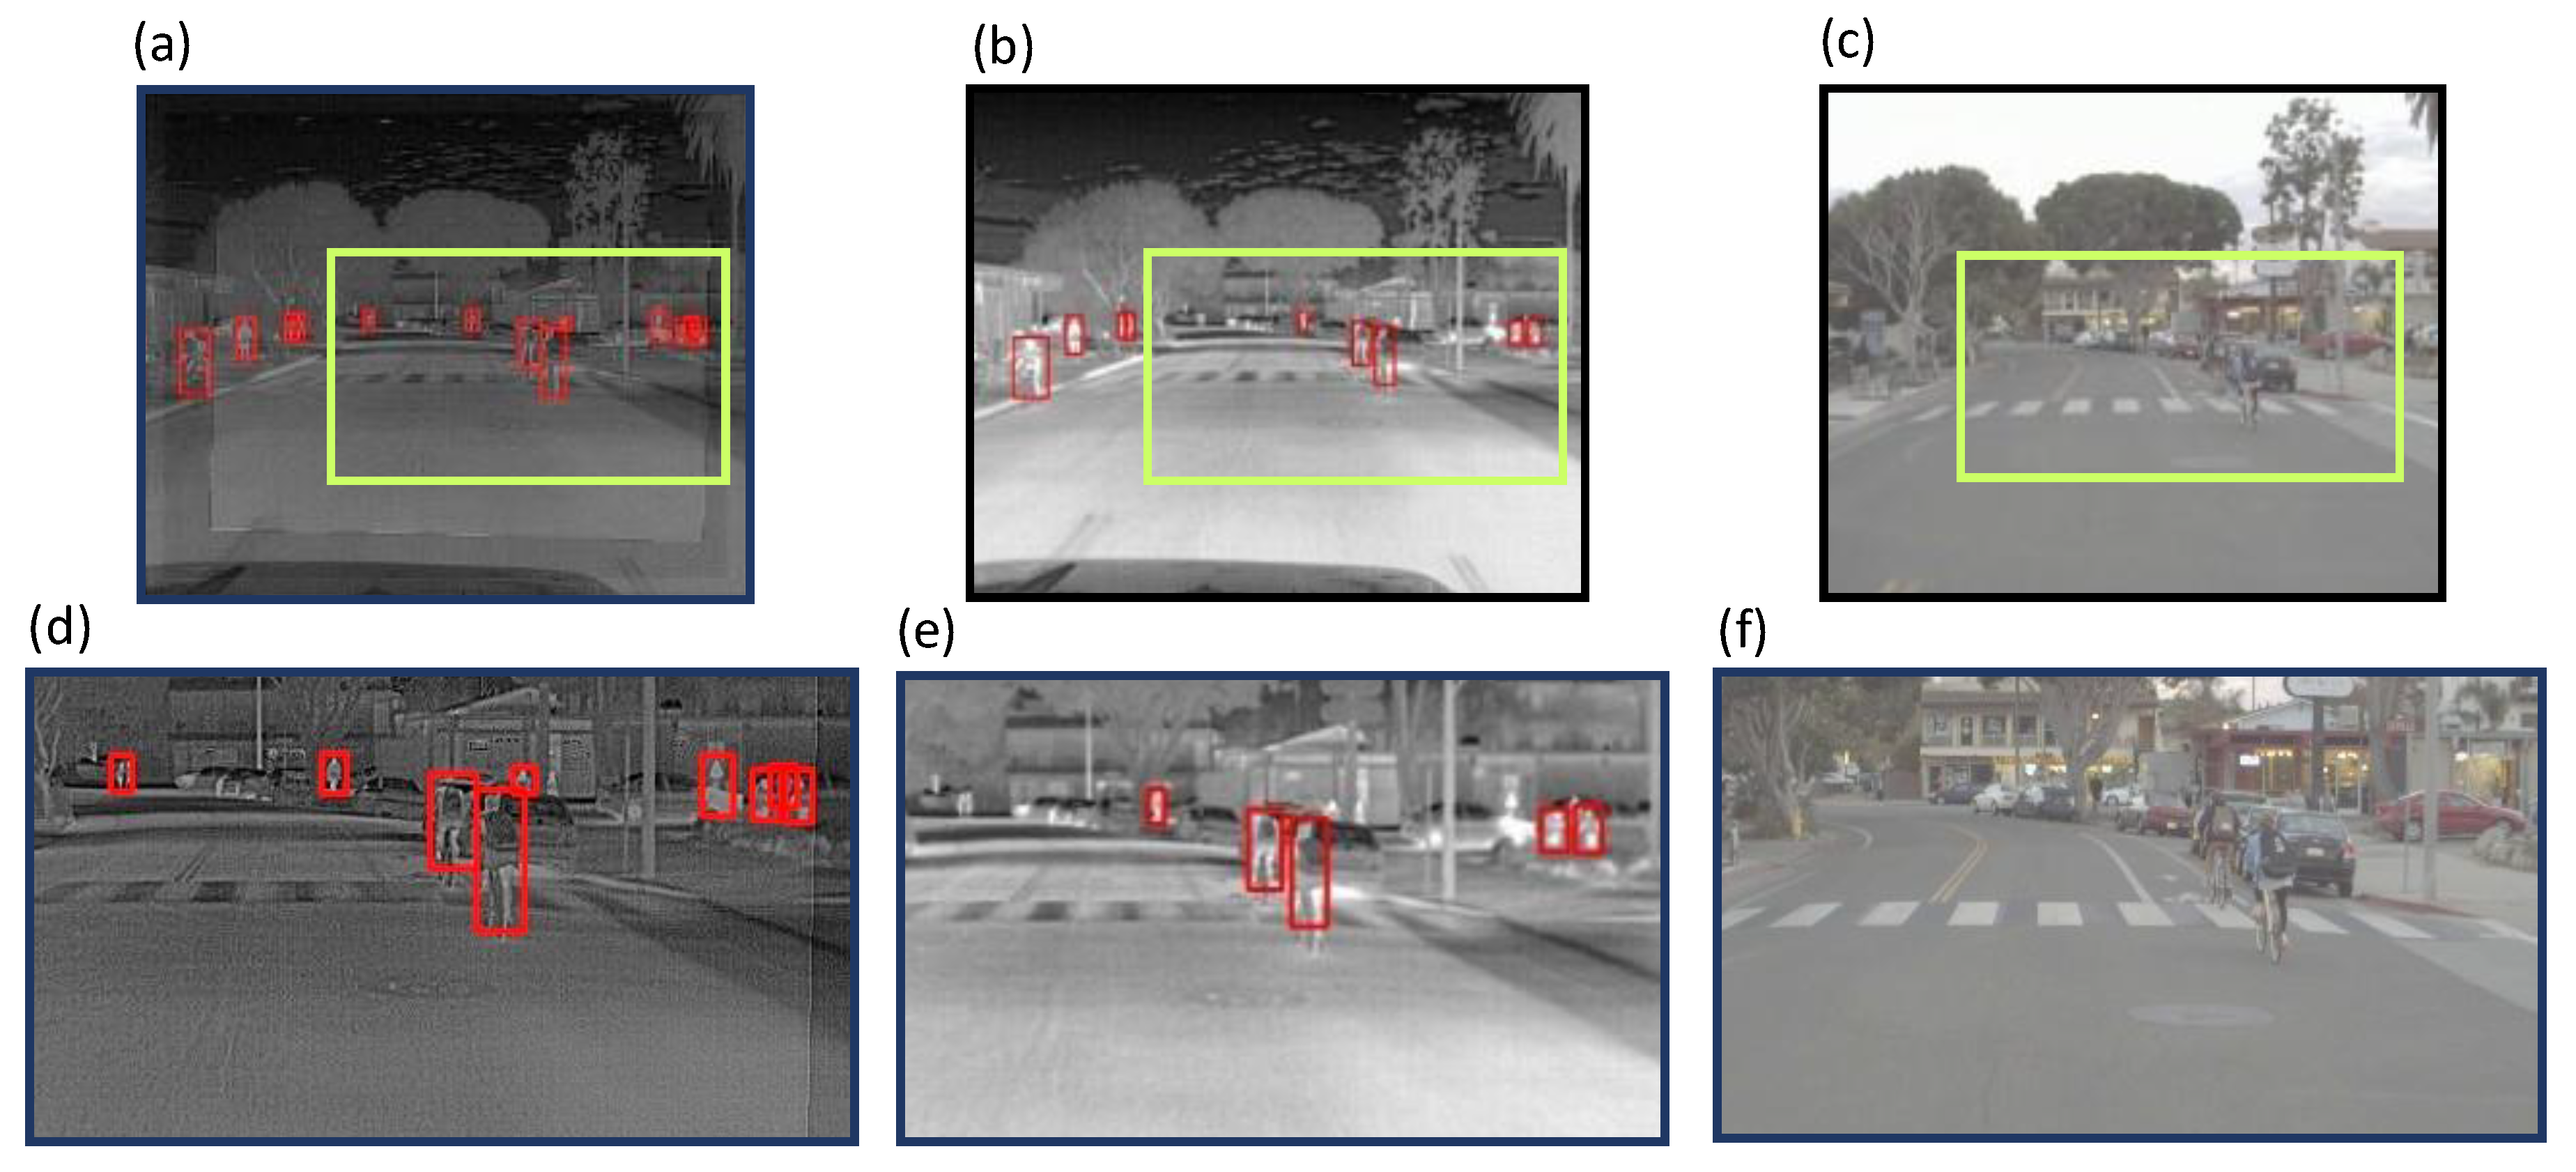 Remote Sensing | Free Full-Text | Fused Thermal and RGB Imagery for Robust  Detection and Classification of Dynamic Objects in Mixed Datasets via  Pre-Trained High-Level CNN